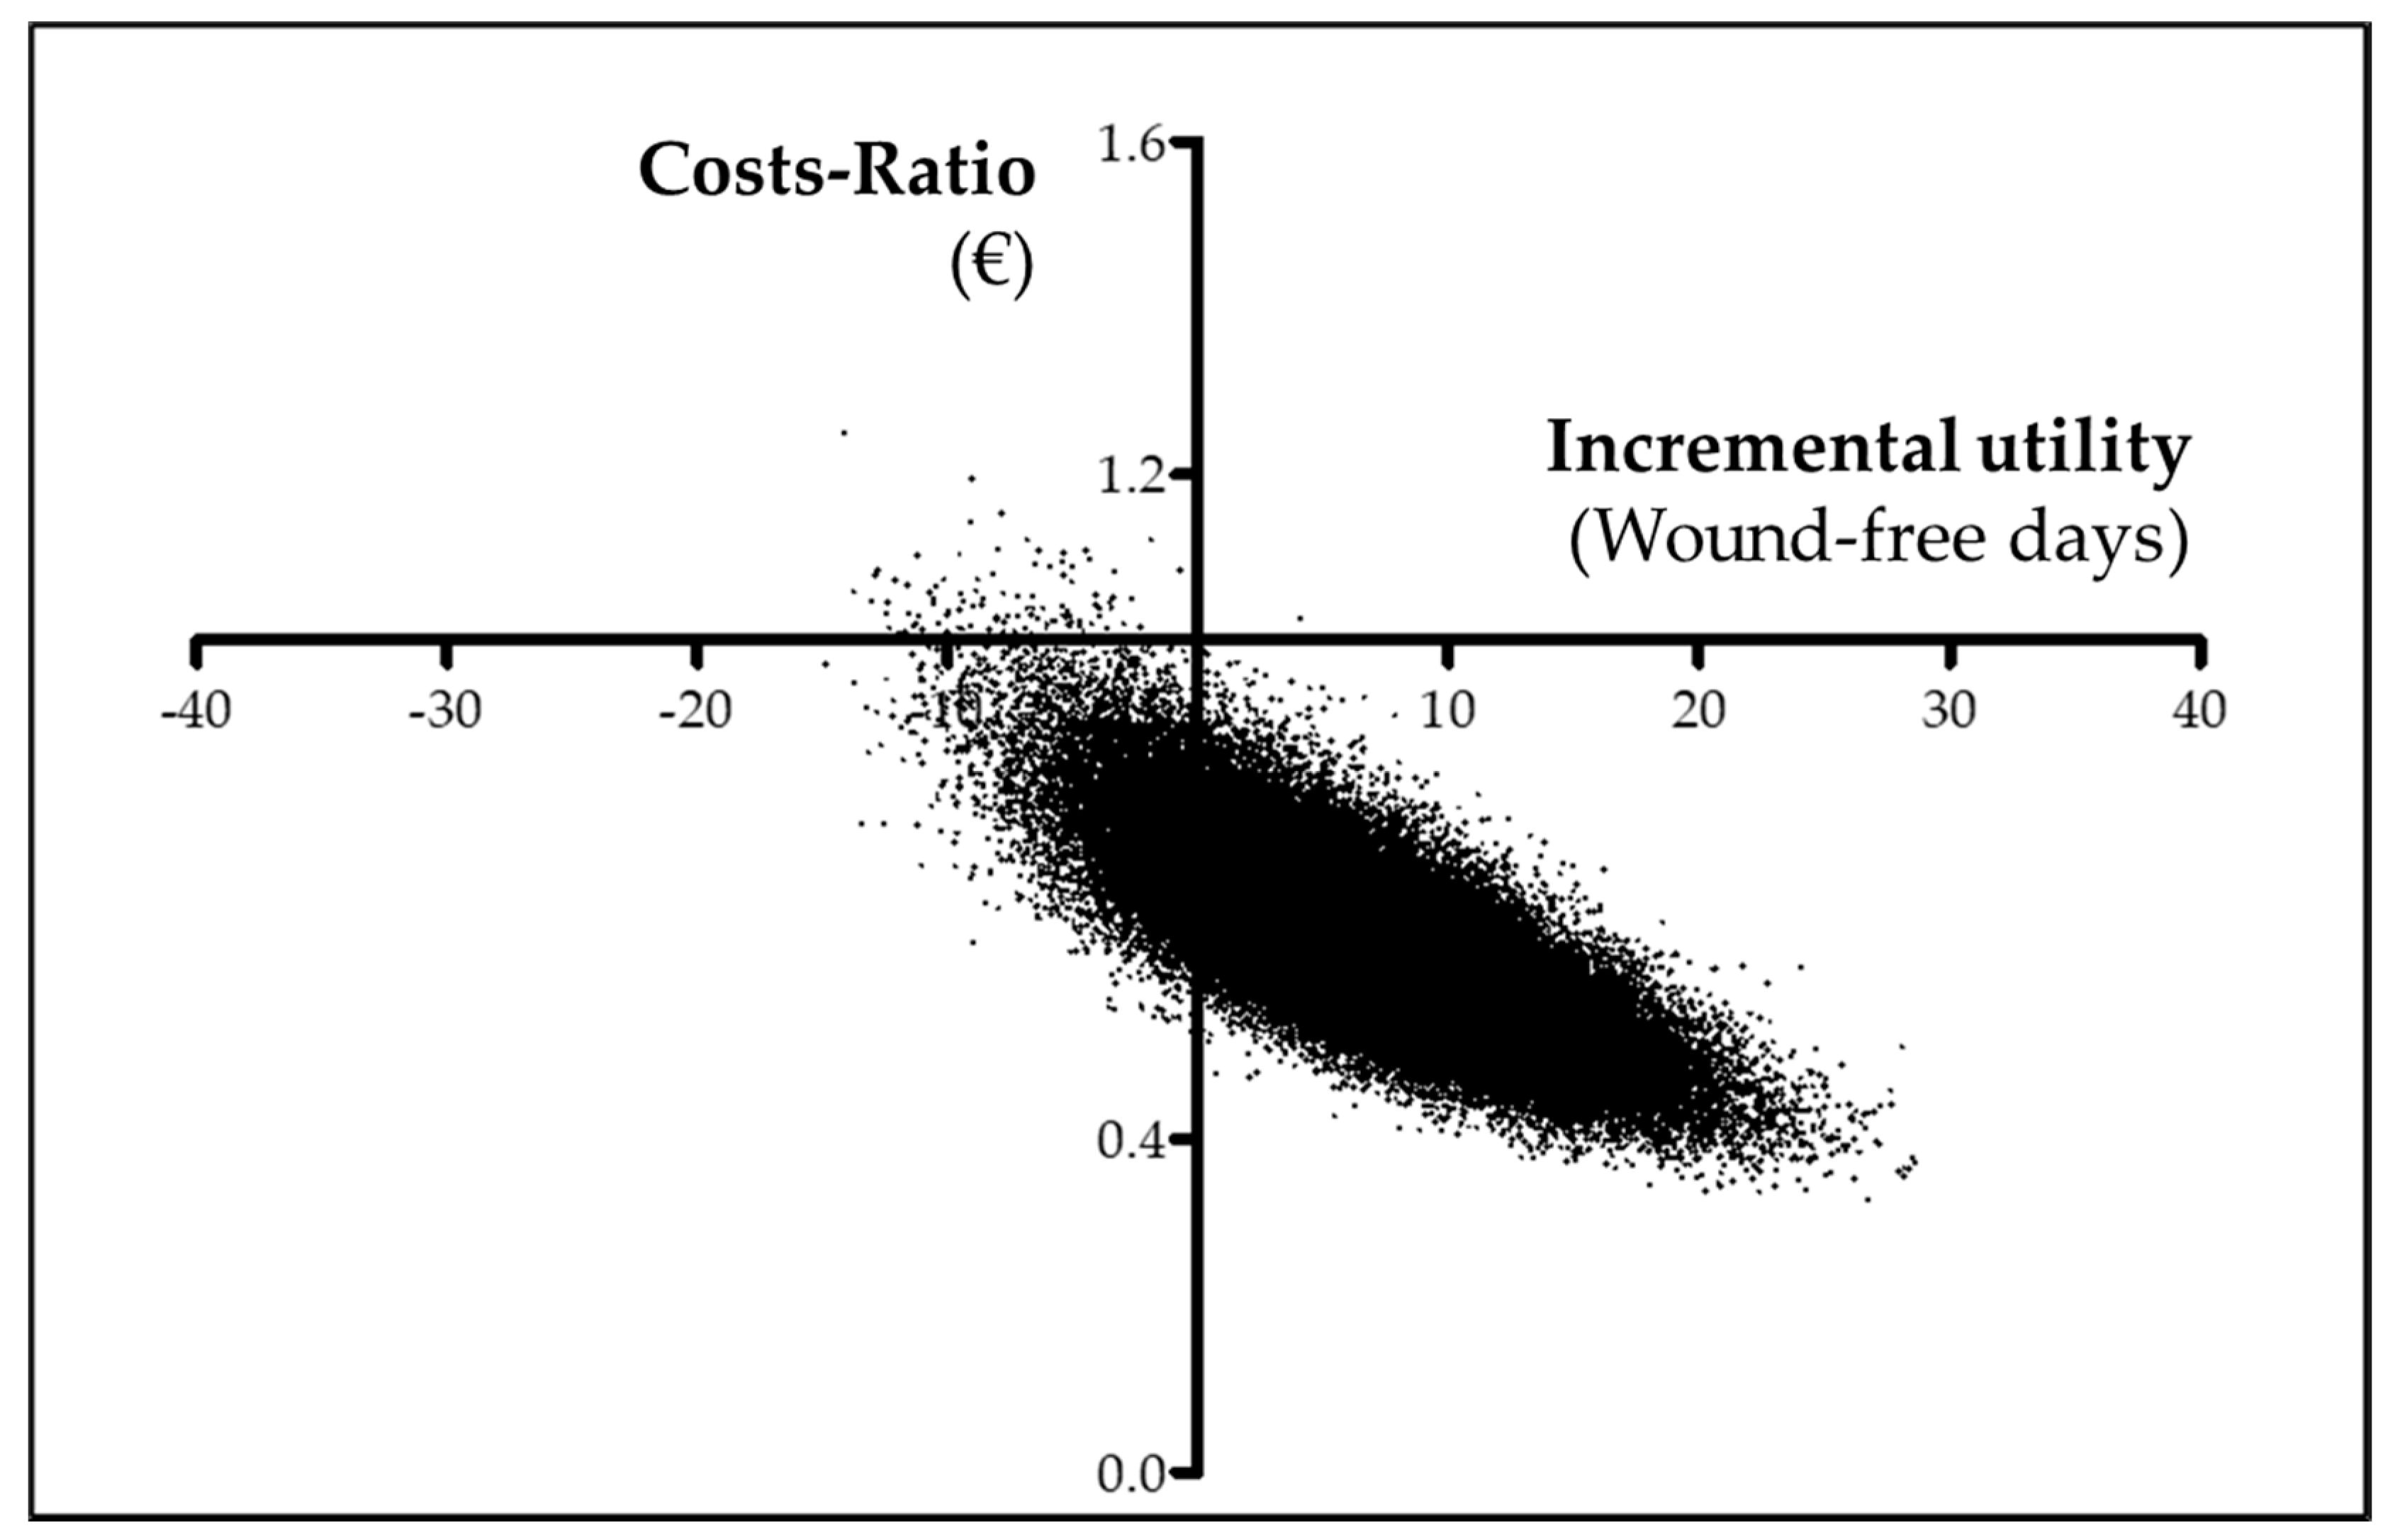 Ijerph Free Full Text Bayesian Regression Model For A Cost Utility And Cost Effectiveness Analysis Comparing Punch Grafting Versus Usual Care For The Treatment Of Chronic Wounds Html